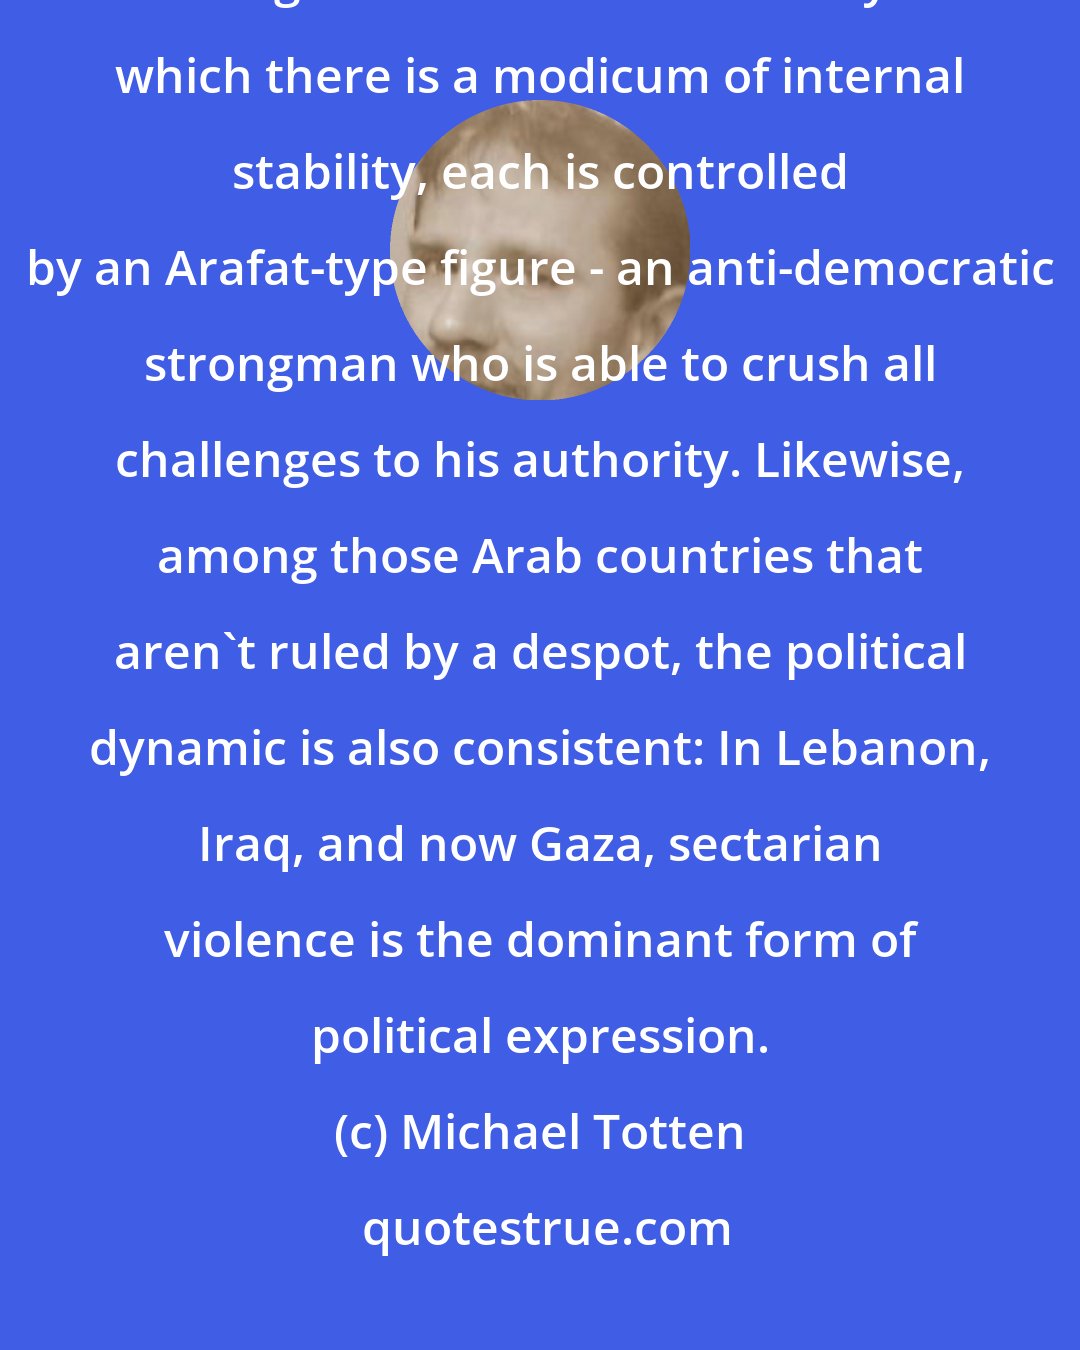 Michael Totten: There is something very consistent about governance in the Arab world. Among the Arab countries today in which there is a modicum of internal stability, each is controlled by an Arafat-type figure - an anti-democratic strongman who is able to crush all challenges to his authority. Likewise, among those Arab countries that aren't ruled by a despot, the political dynamic is also consistent: In Lebanon, Iraq, and now Gaza, sectarian violence is the dominant form of political expression.